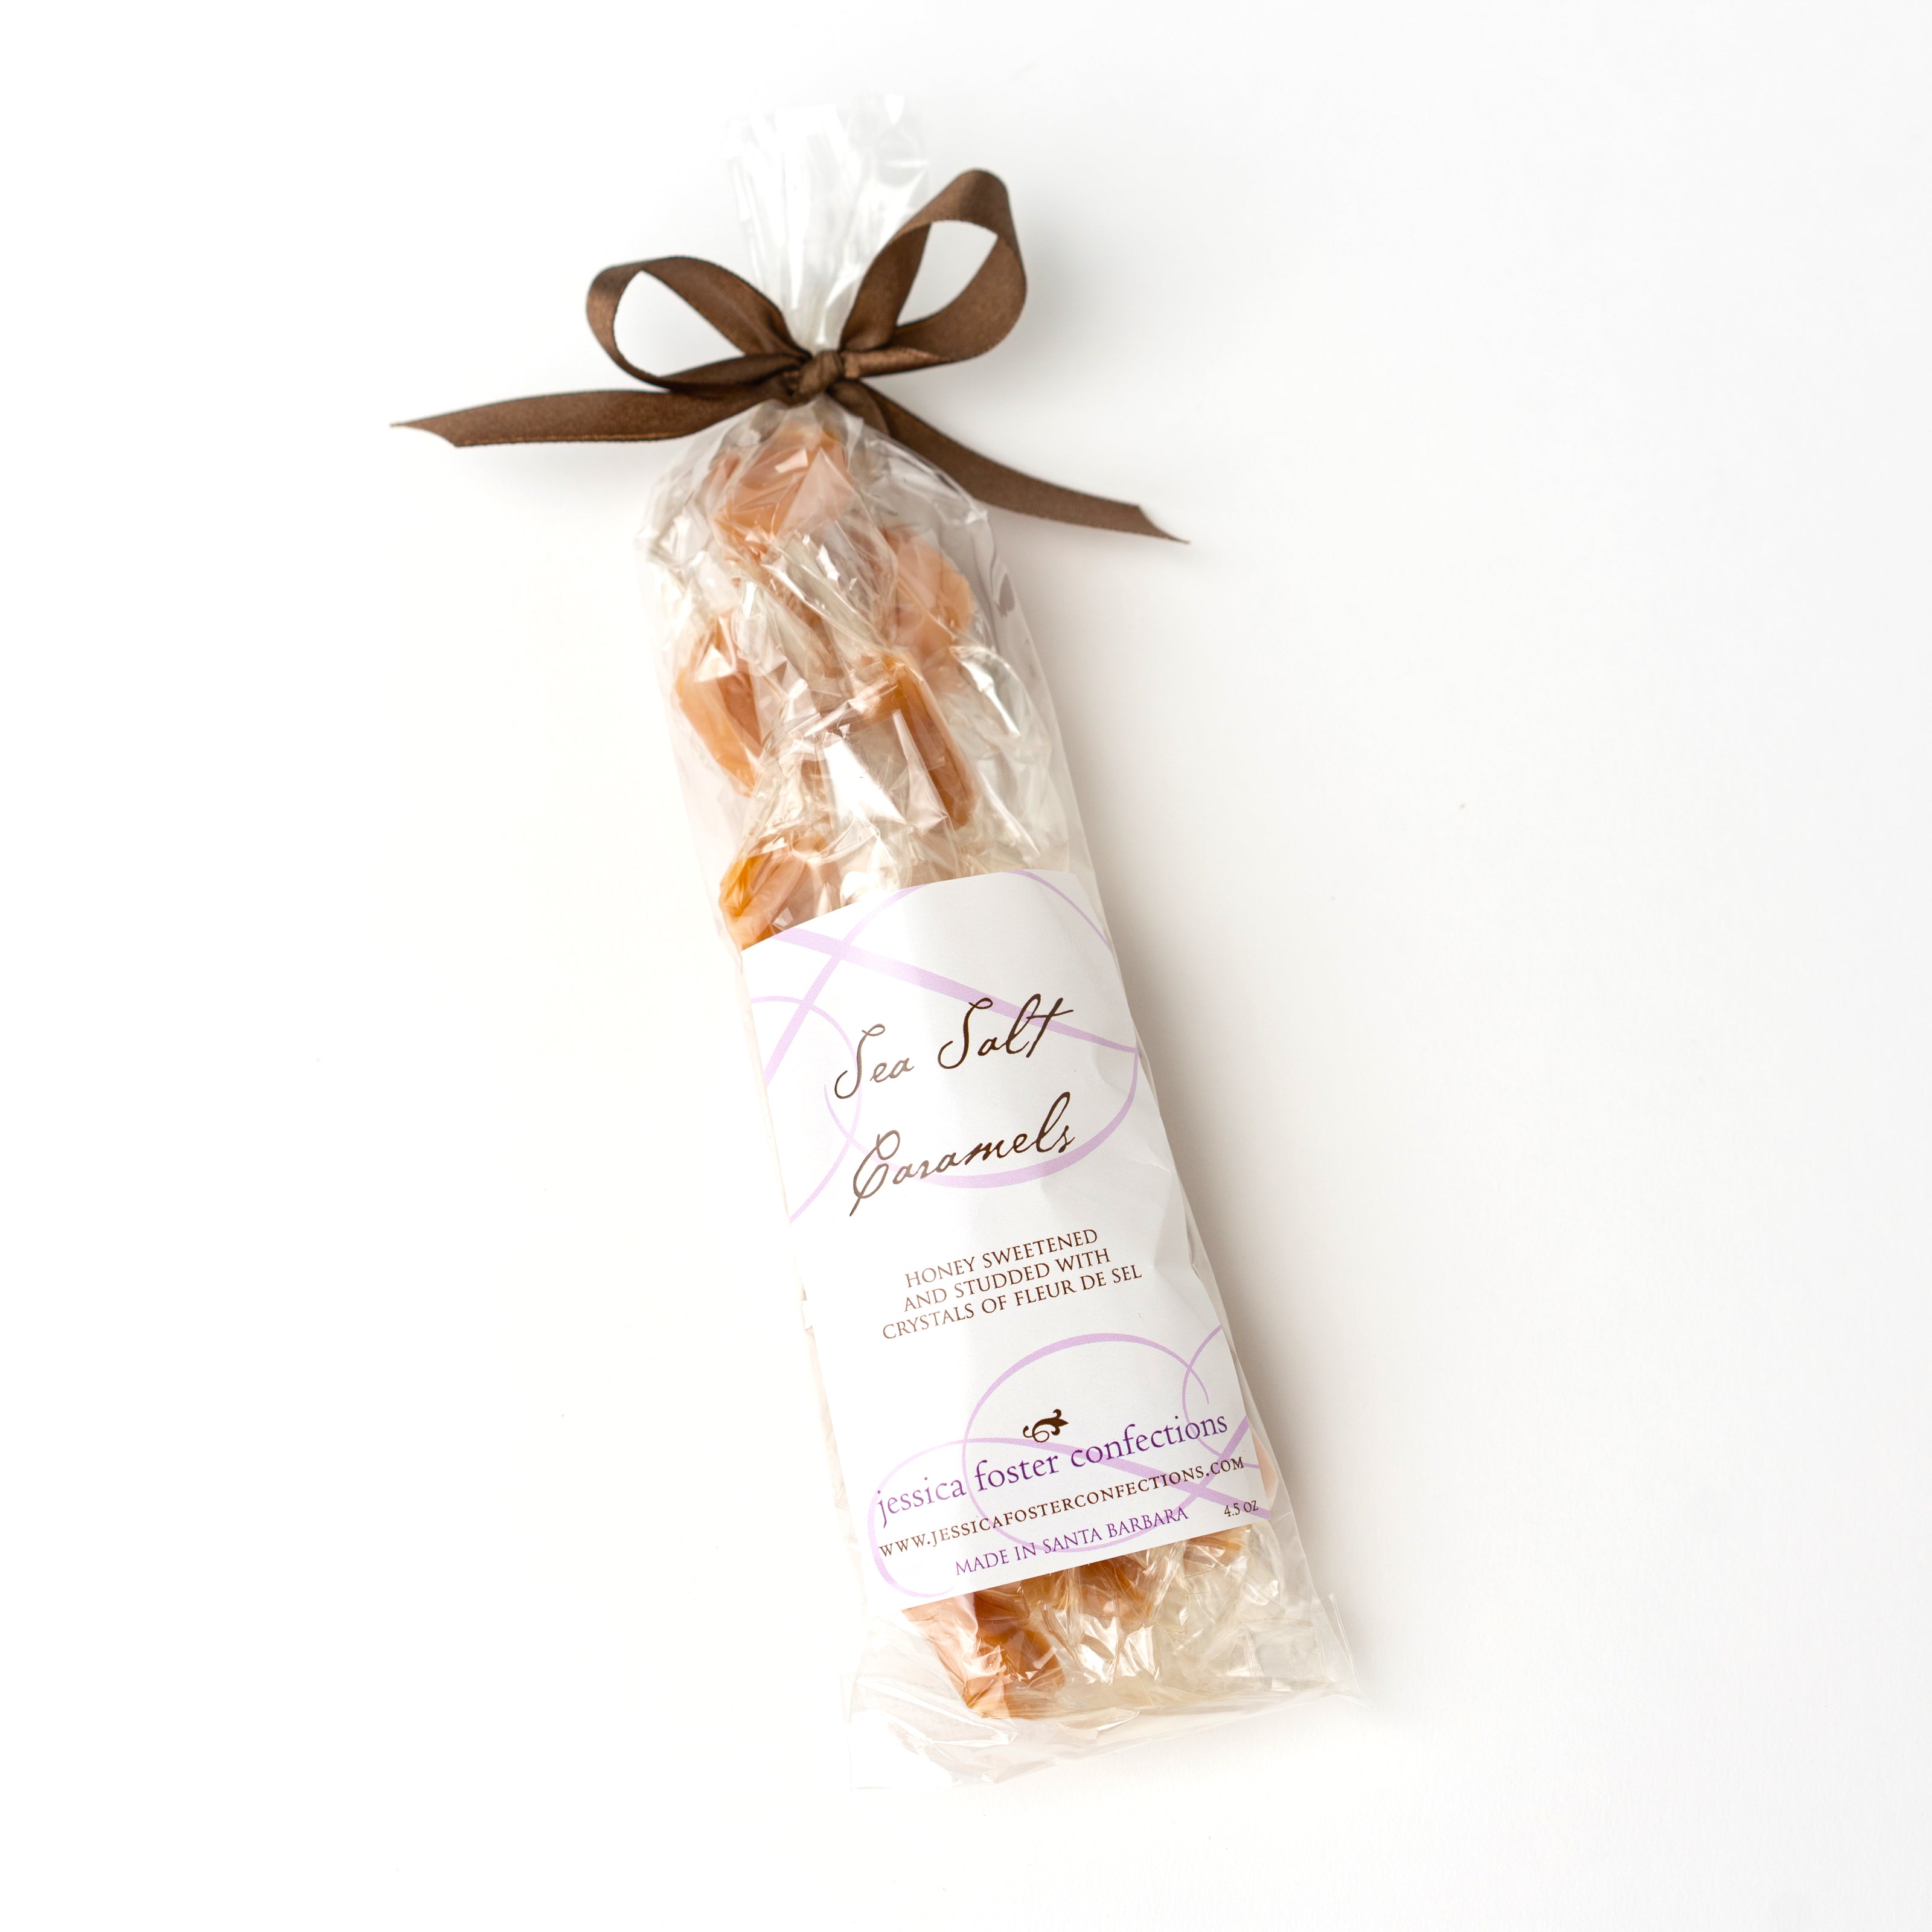 Clear plastic bag filled with small caramels, tied closed with a brown bow